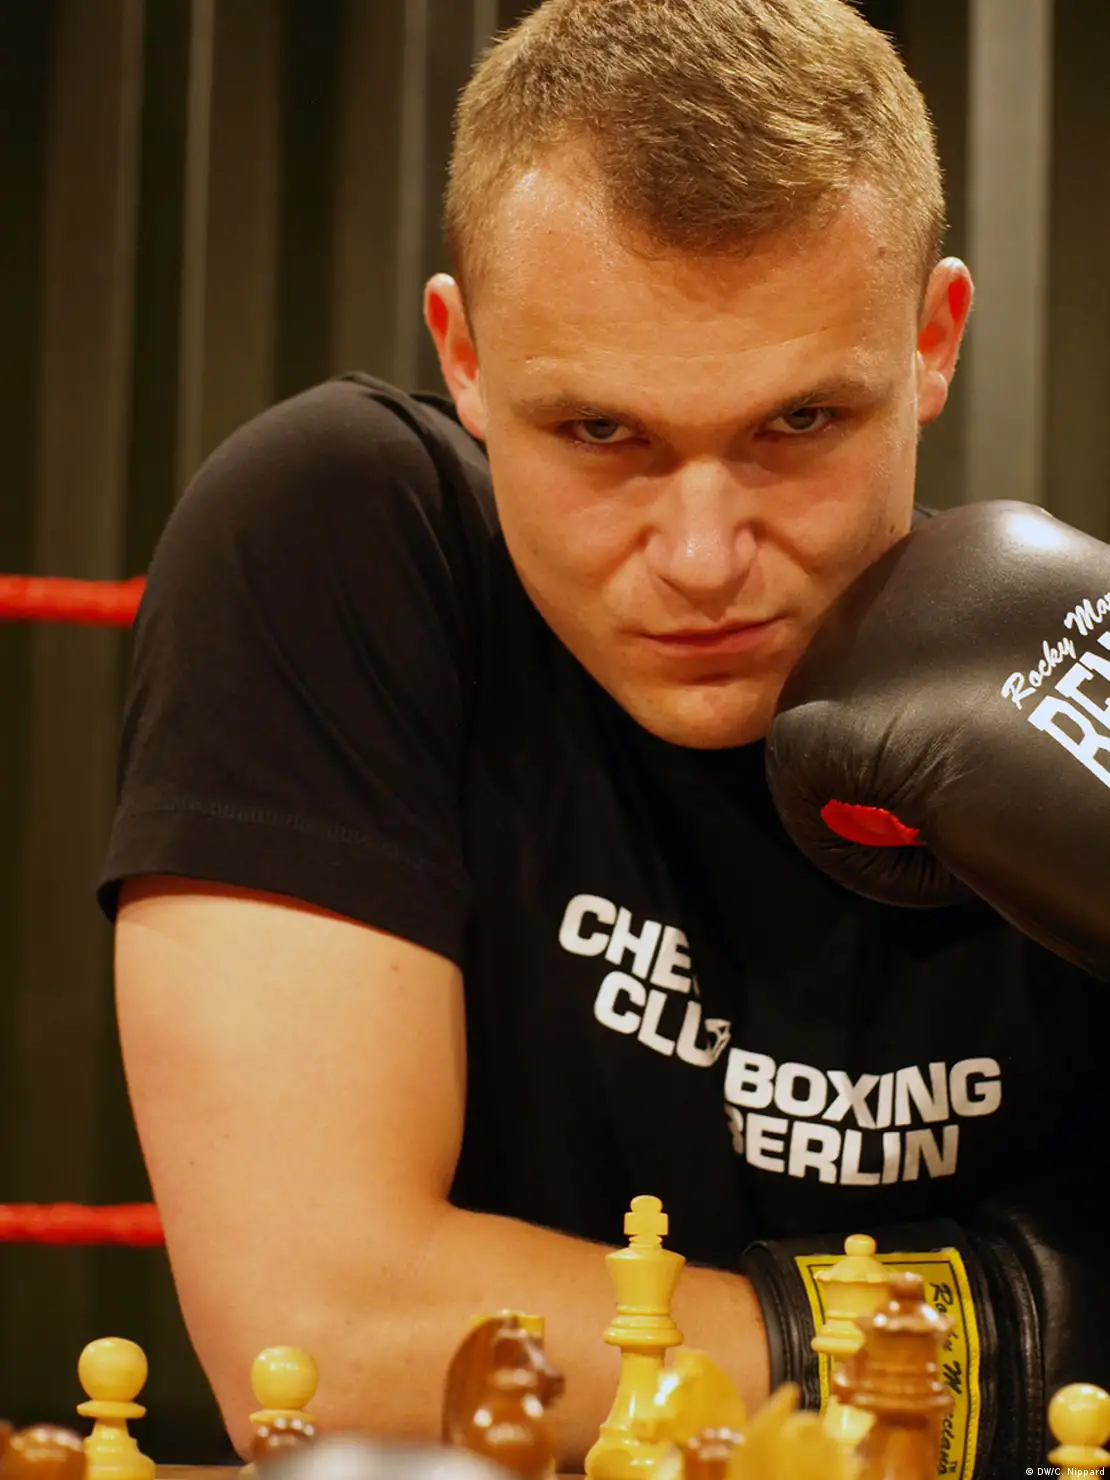 Competitive Chess Boxing: Brain Meets Pain in Iceland